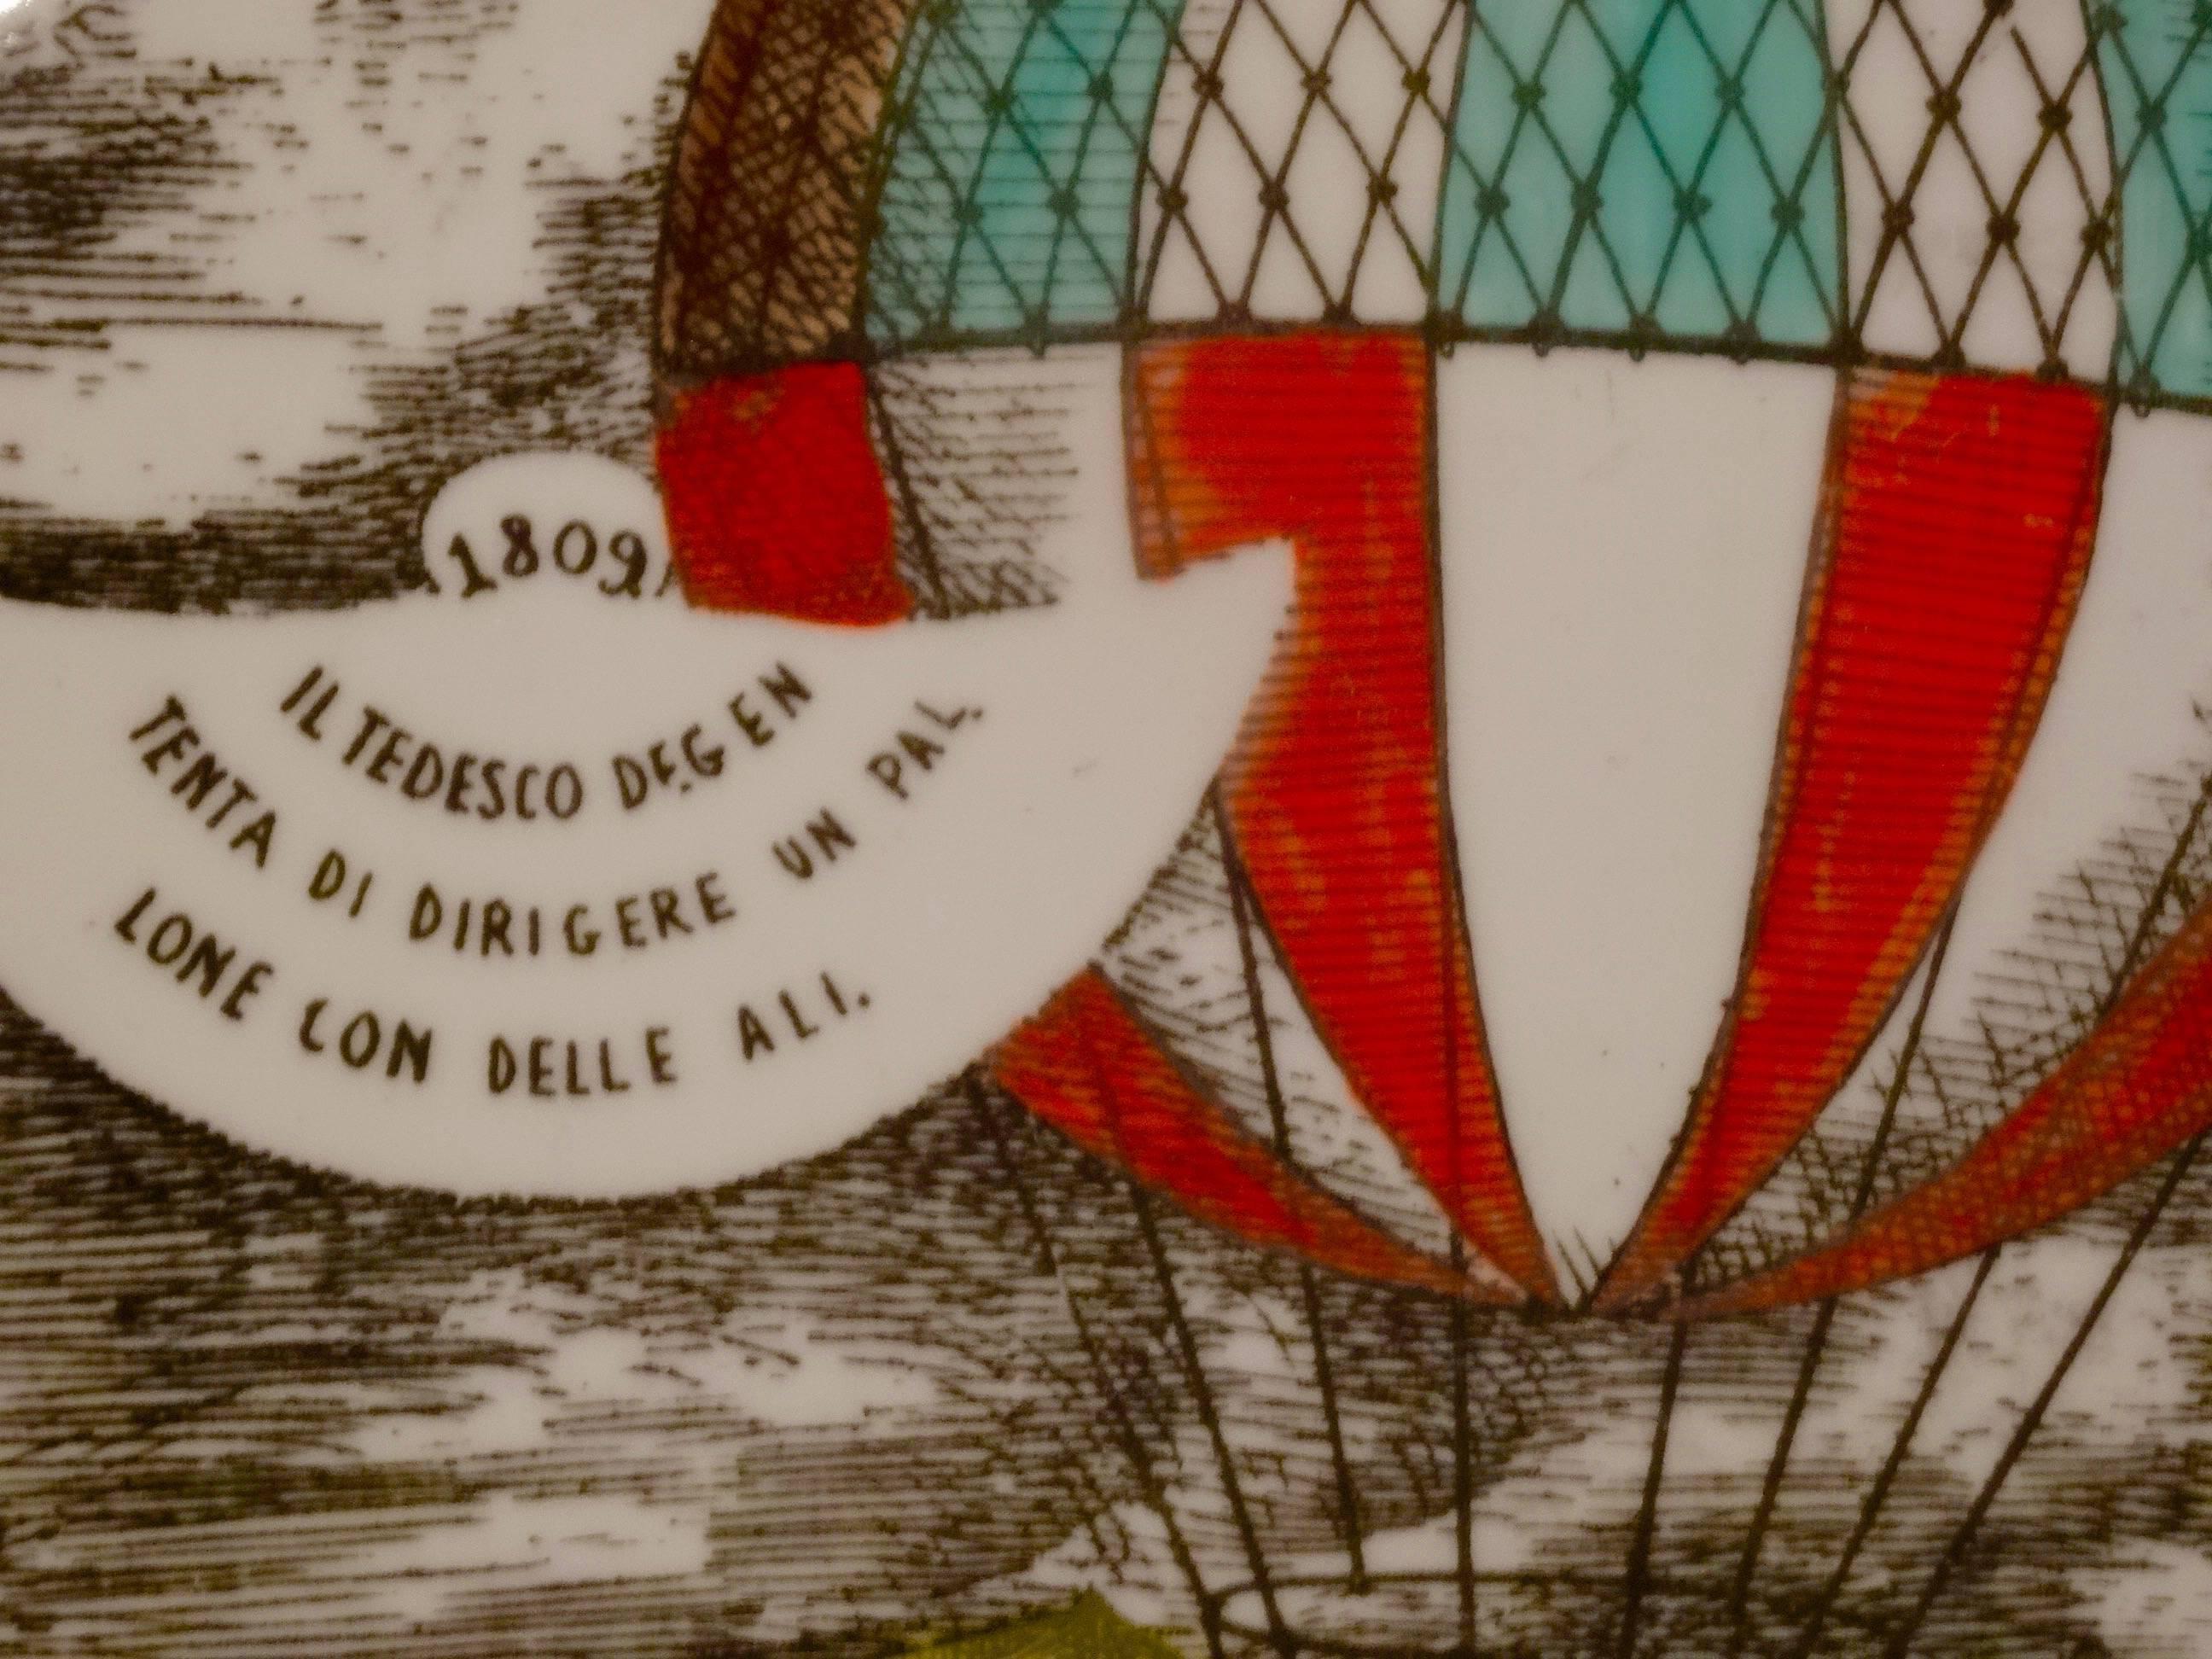 The Mongolfiere (Hot air ballon) plates where designed in 1955 by Piero Fornasetti and came as a numbered set of 12. 